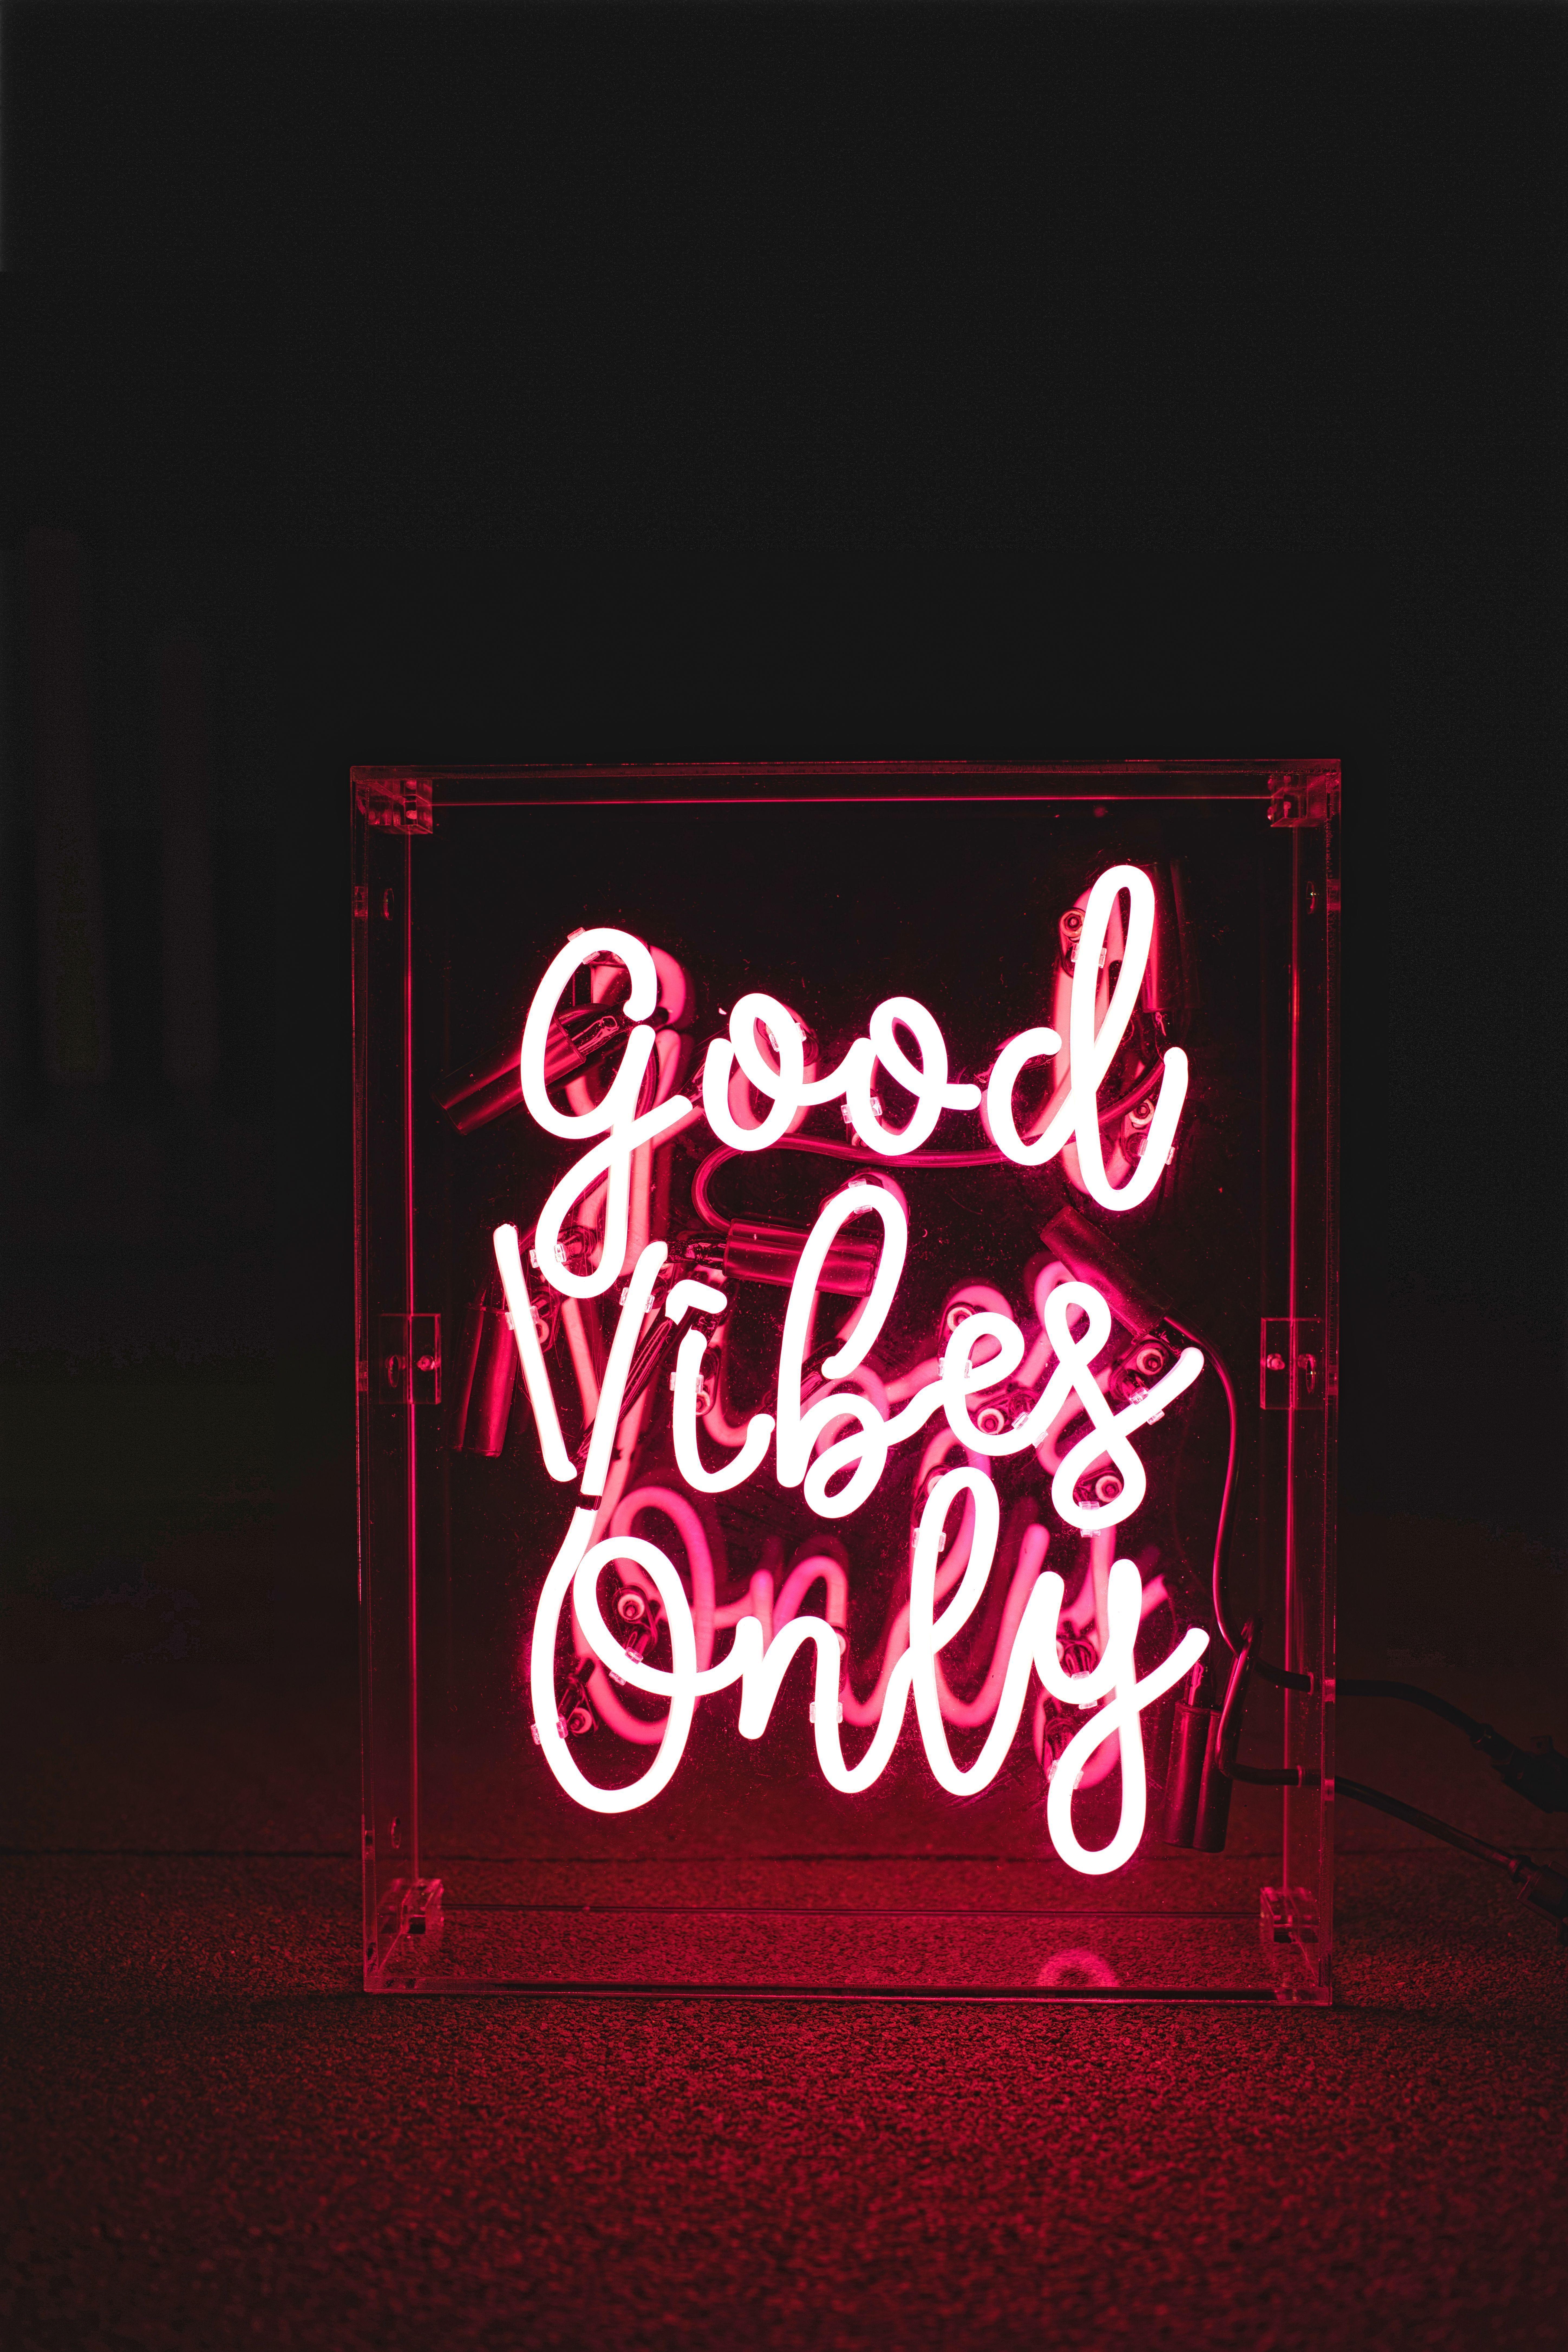 A neon sign that says good vibes only - Neon red